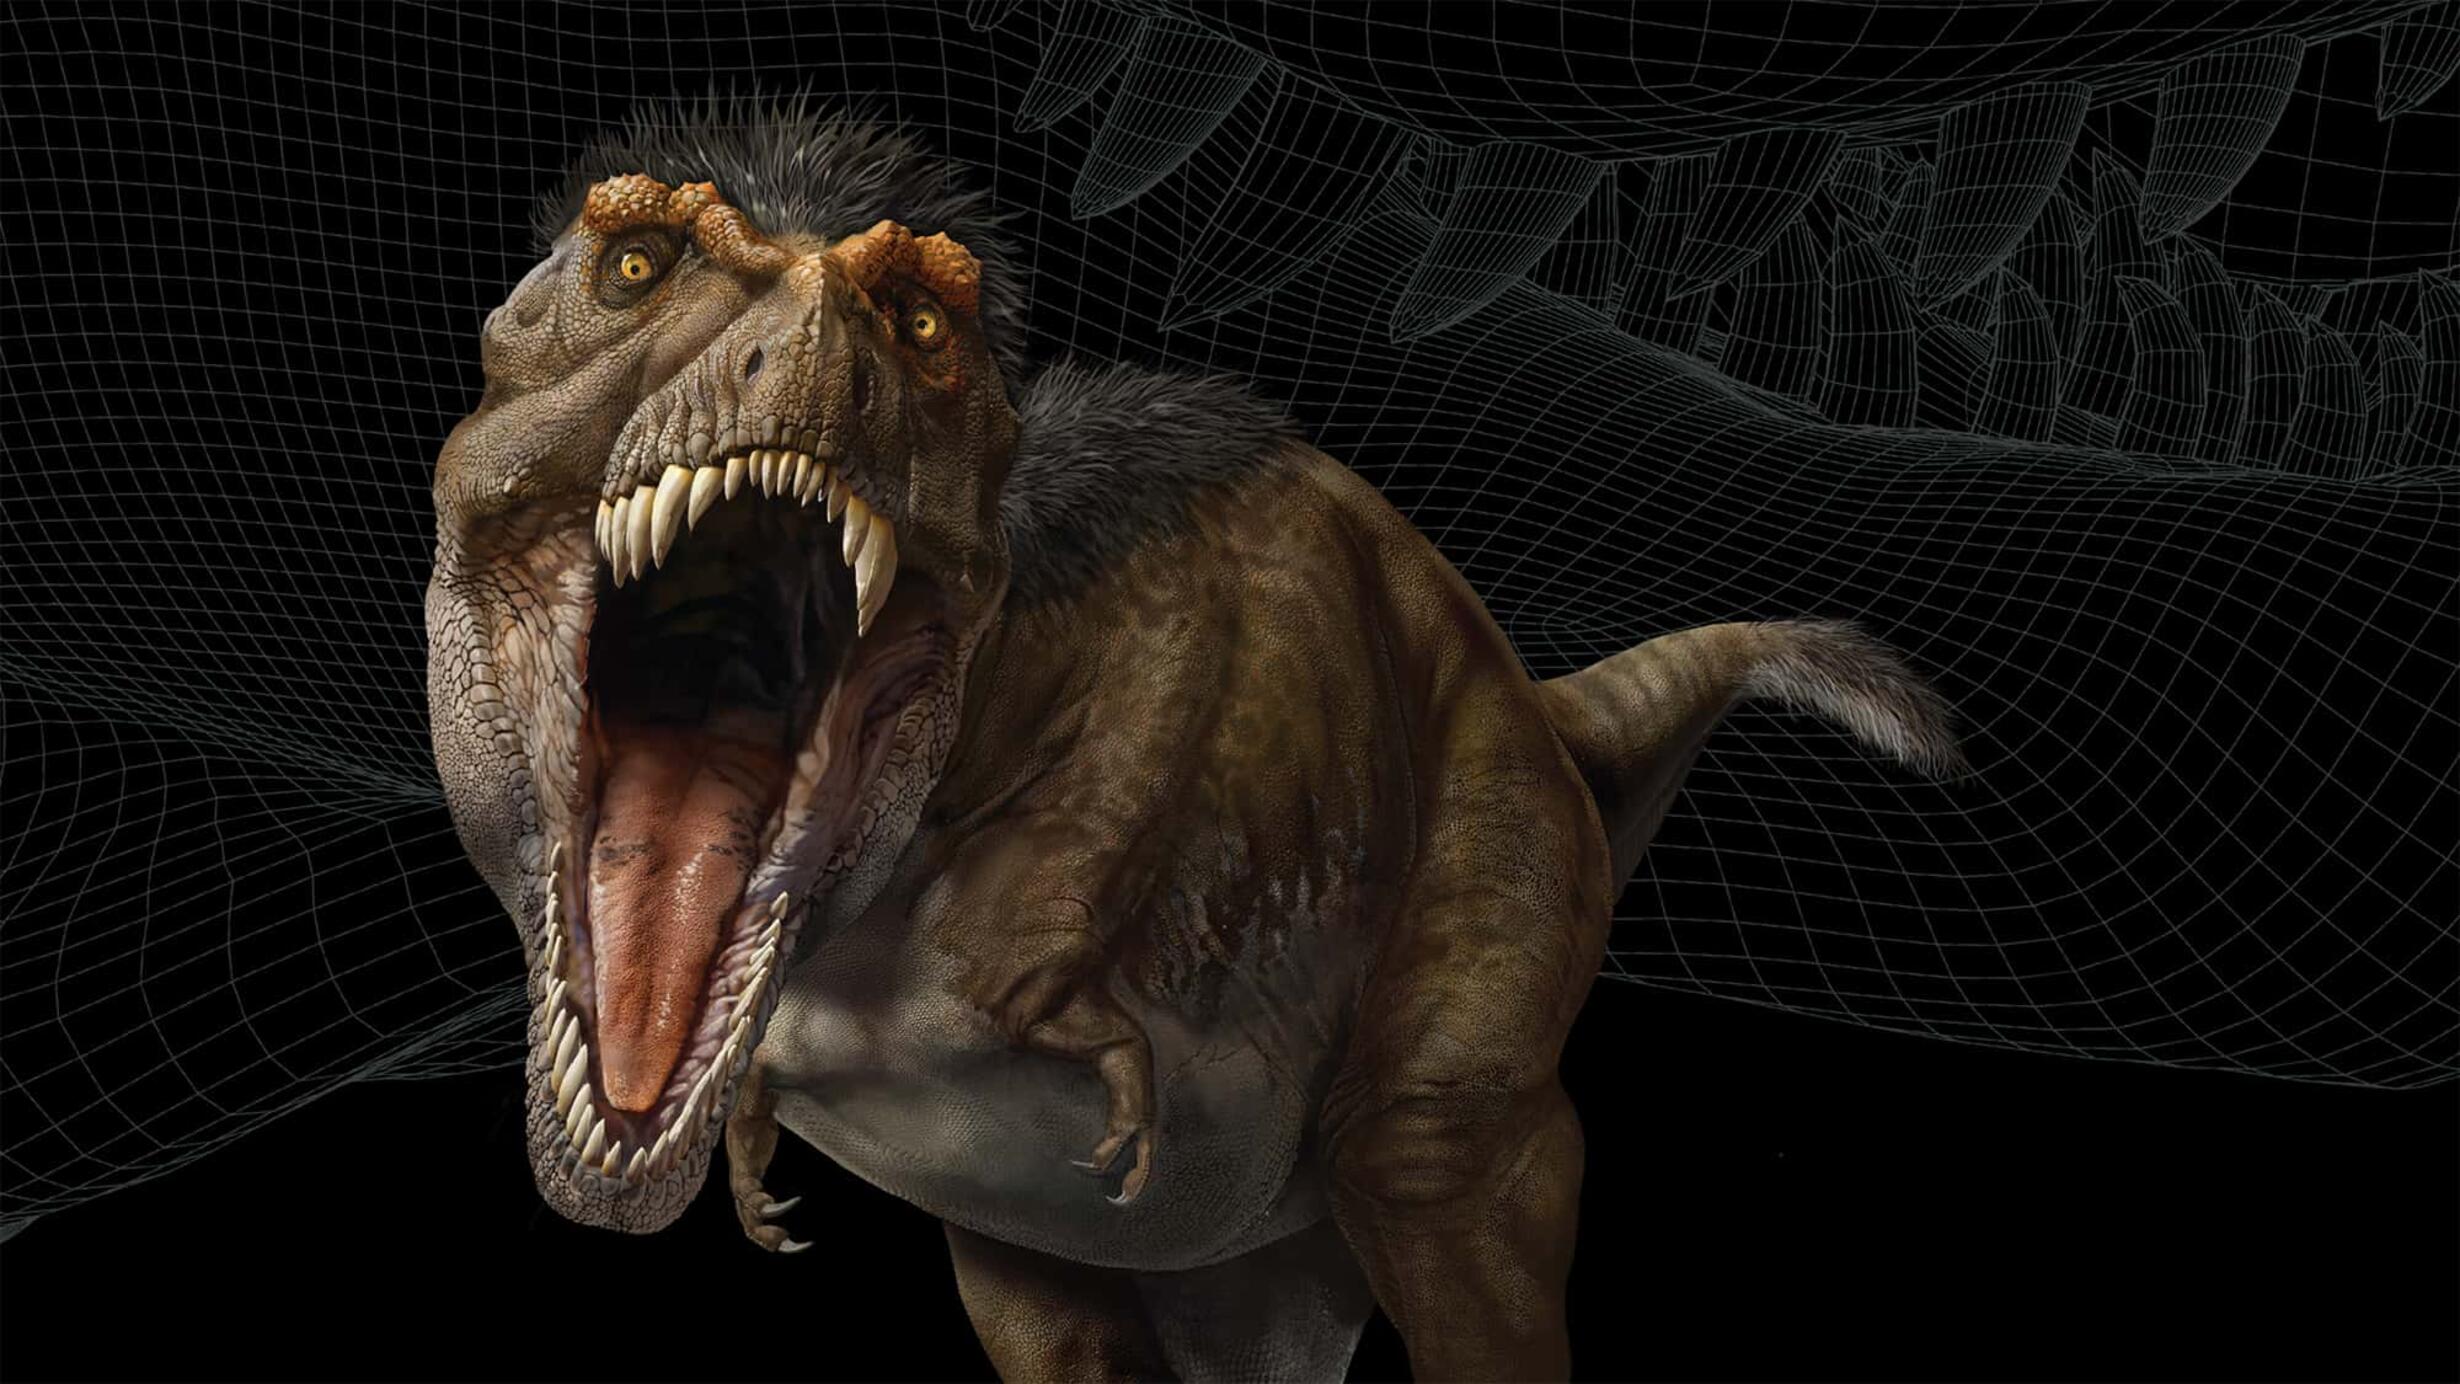 Visualization of a Tyrannosaurus Rex with its mouth wide open, revealing rows of sharp teeth.